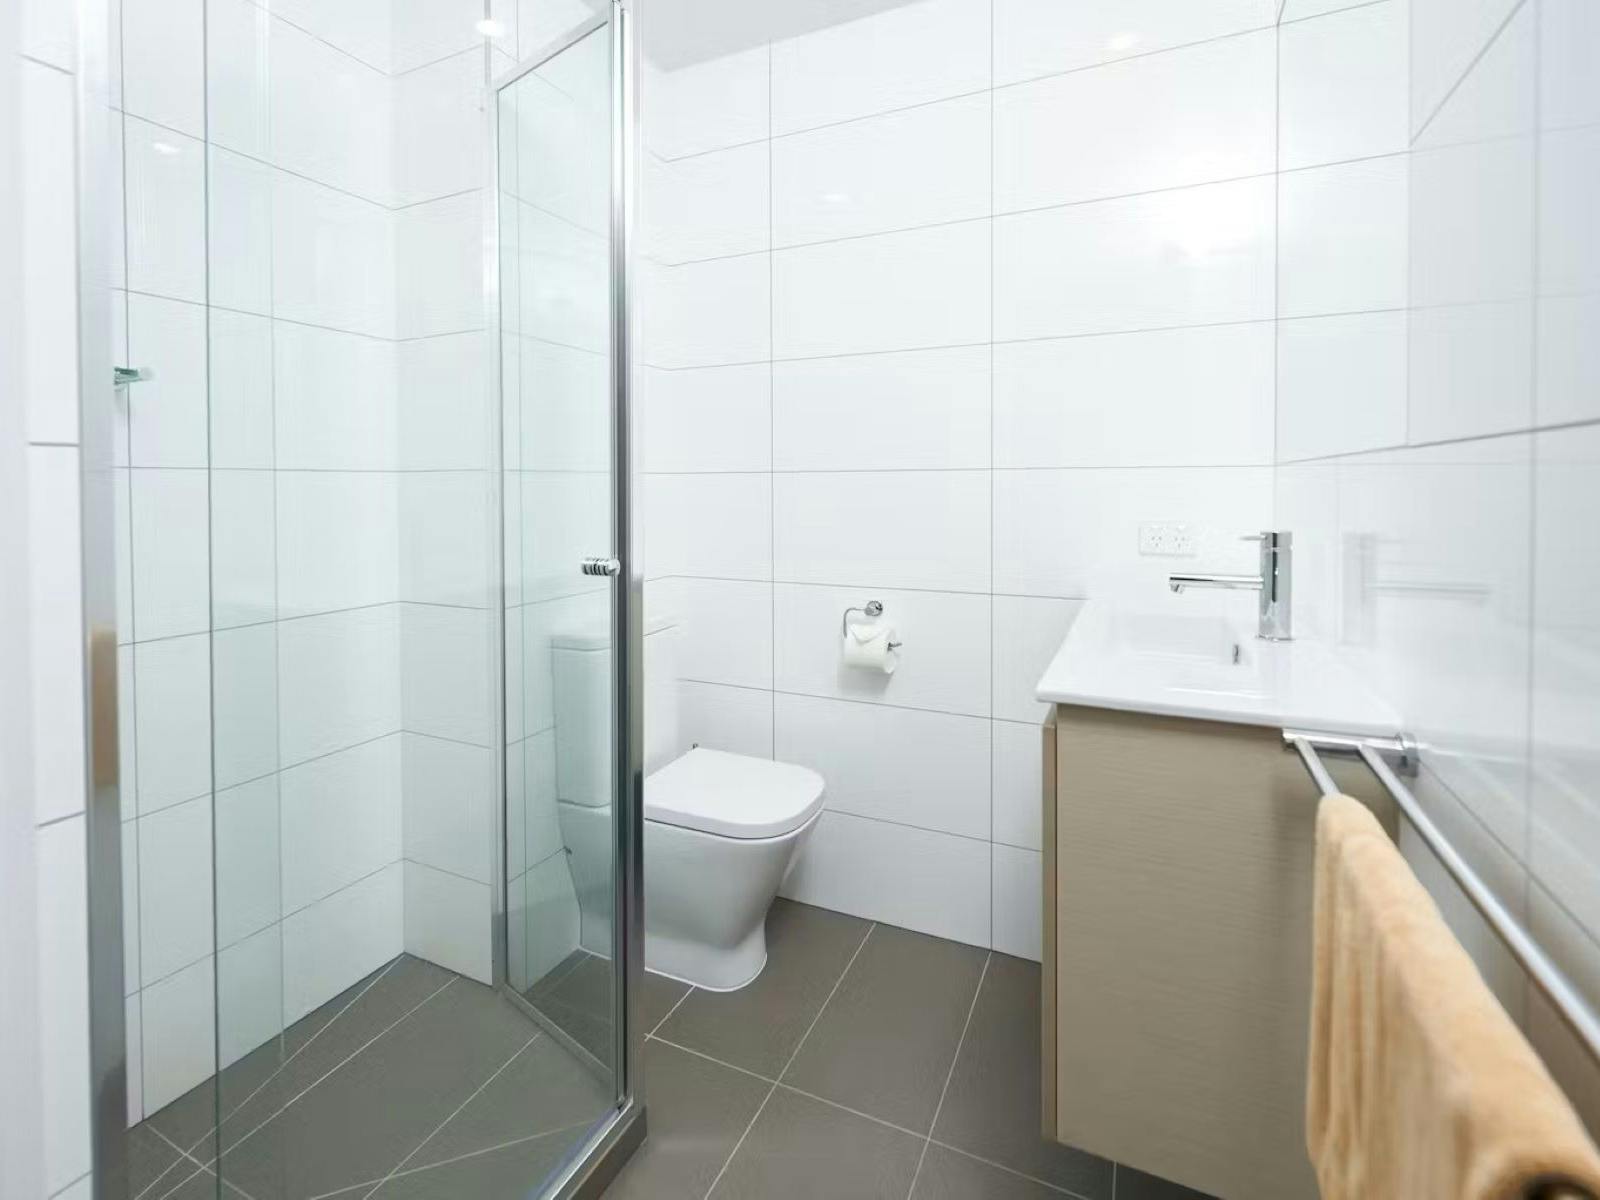 Bathroom for family and singles rooms - Shower, vanity and toilet